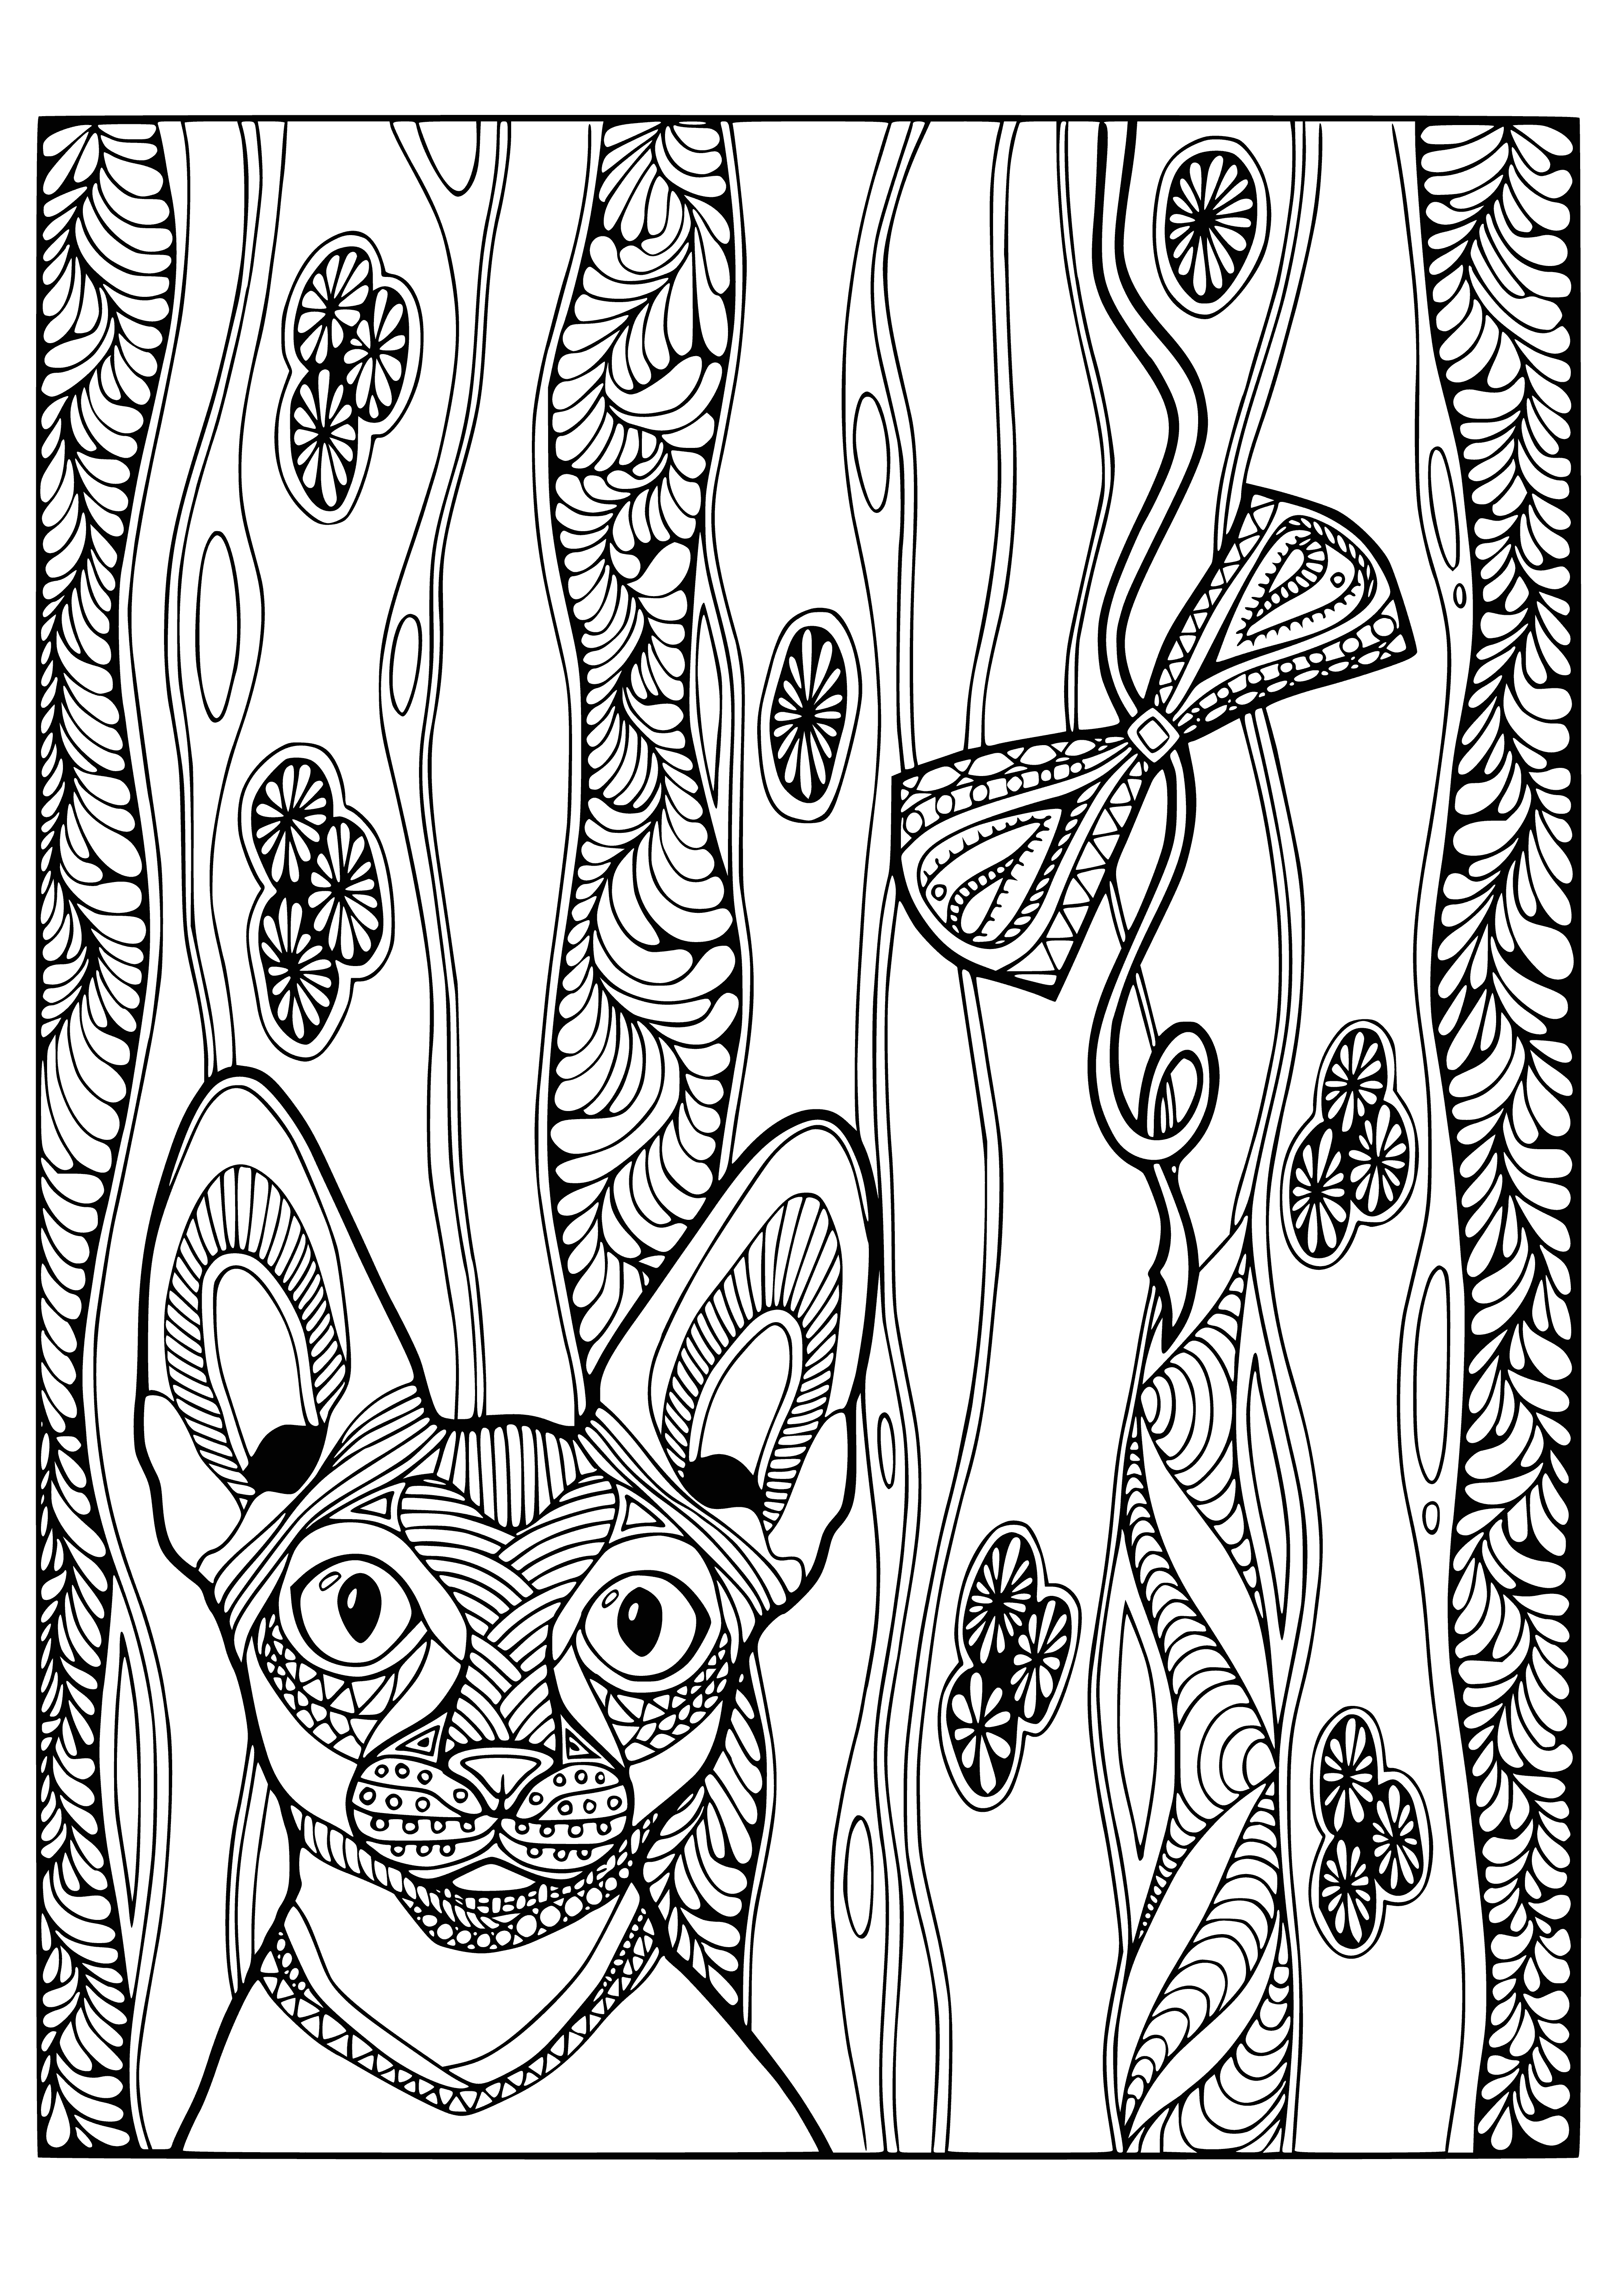 coloring page: A big furry cat with white markings lies on a cushion surrounded by flowers and leaves. Gradient bg of blue, green, purple. #coloringbook